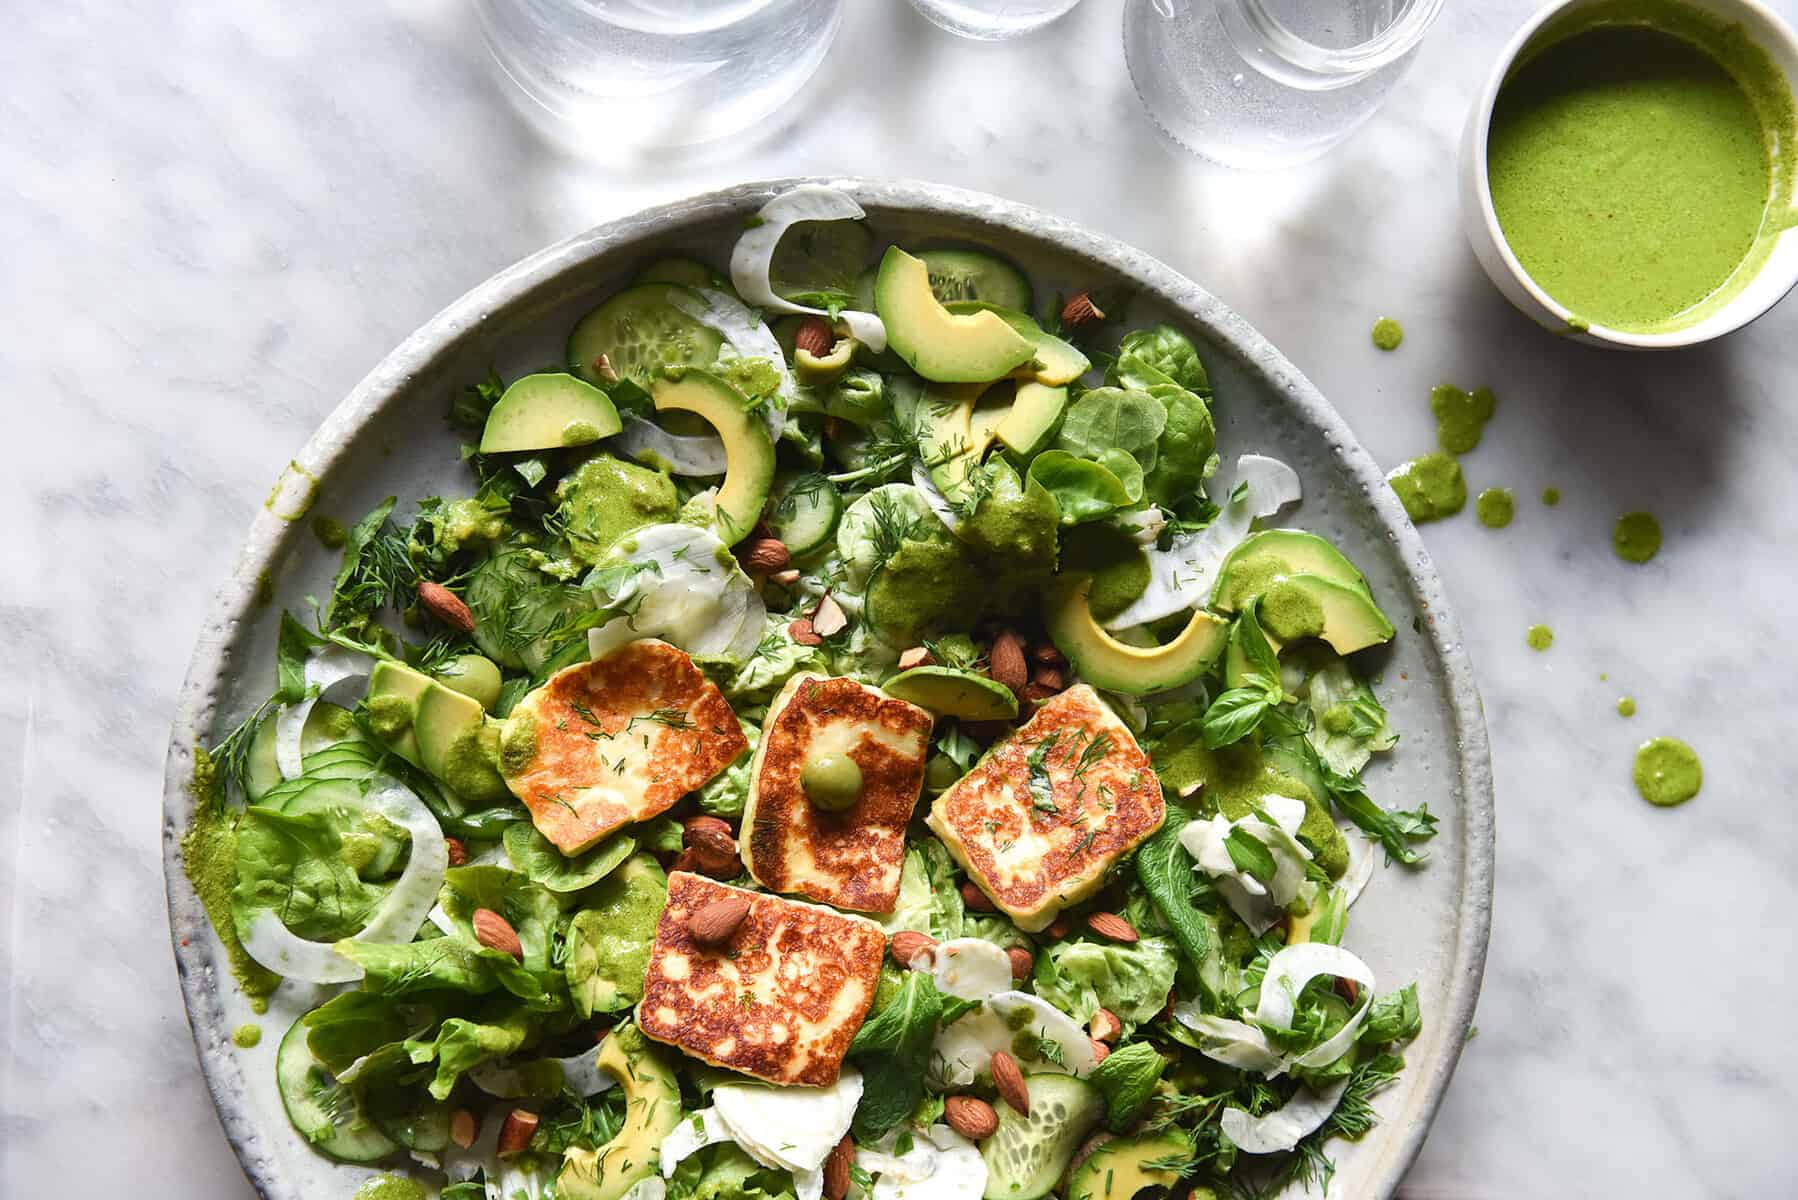 Green salad with haloumi, avocado and fennel topped with a FODMAP friendly almond pesto. It sits on a white ceramic serving platter on a white marble table. Glasses of water sit in the top of the image and cast pleasant light over the salad.